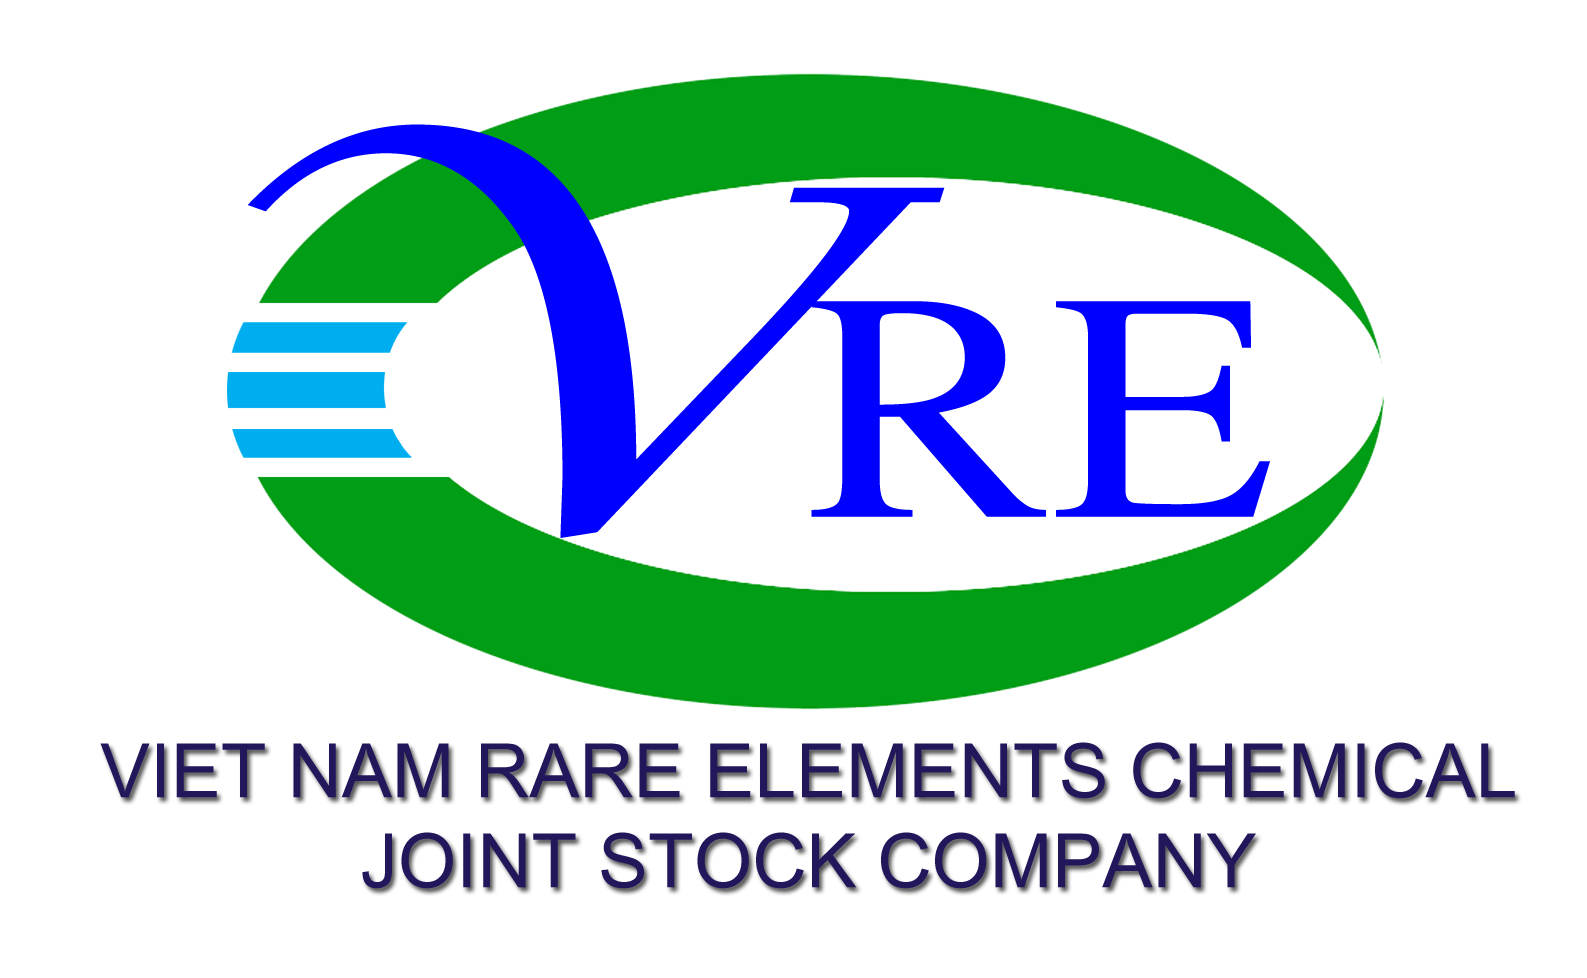 VIETNAM RARE ELEMENTS CHEMICAL JOINT STOCK COMPANY